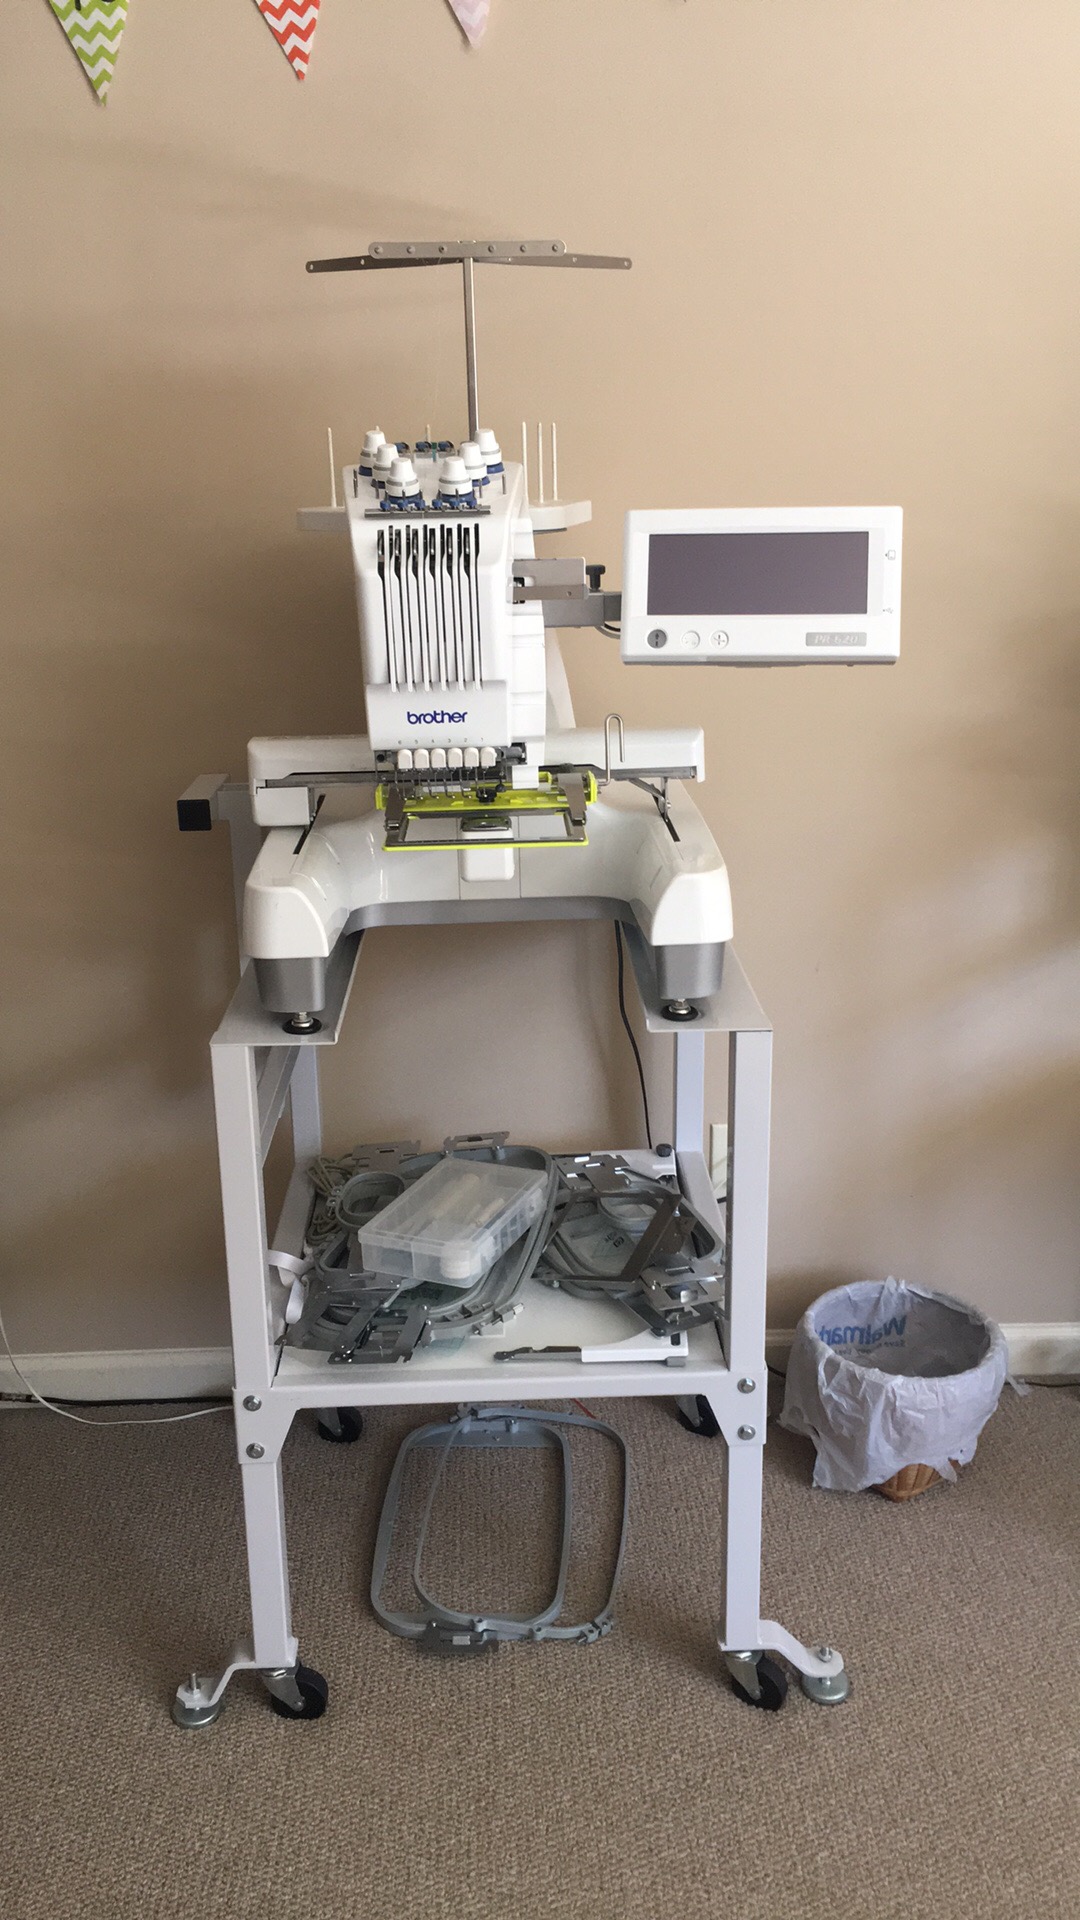 Brother PR 620 6 Needle Embroidery Machine for sale